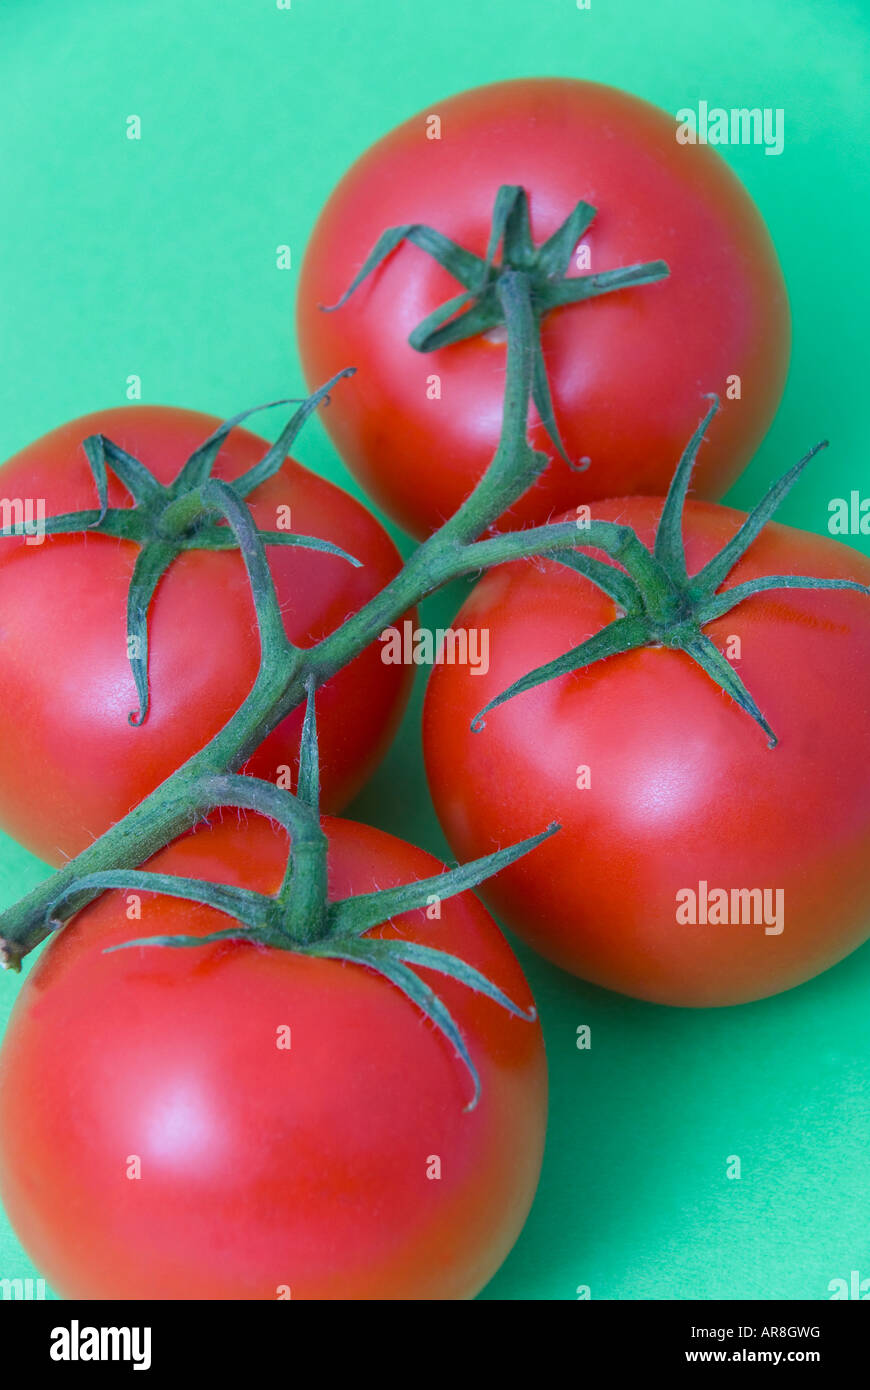 Ripe red truss tomatoes on green background Stock Photo